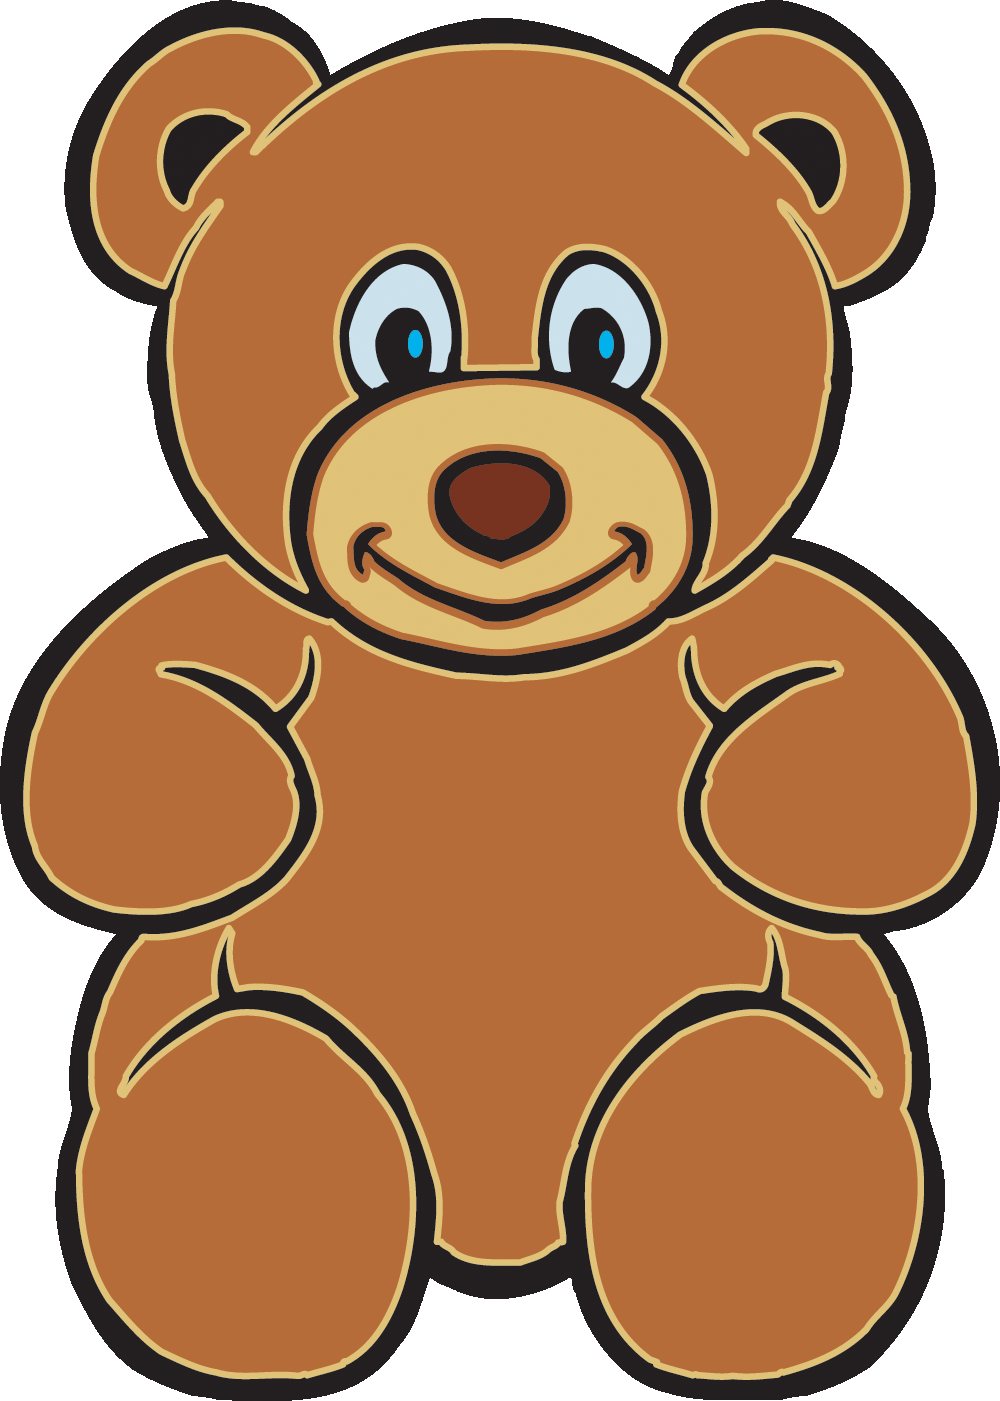 Big Cute Teddy Bears Free Cliparts That You Can Download To You